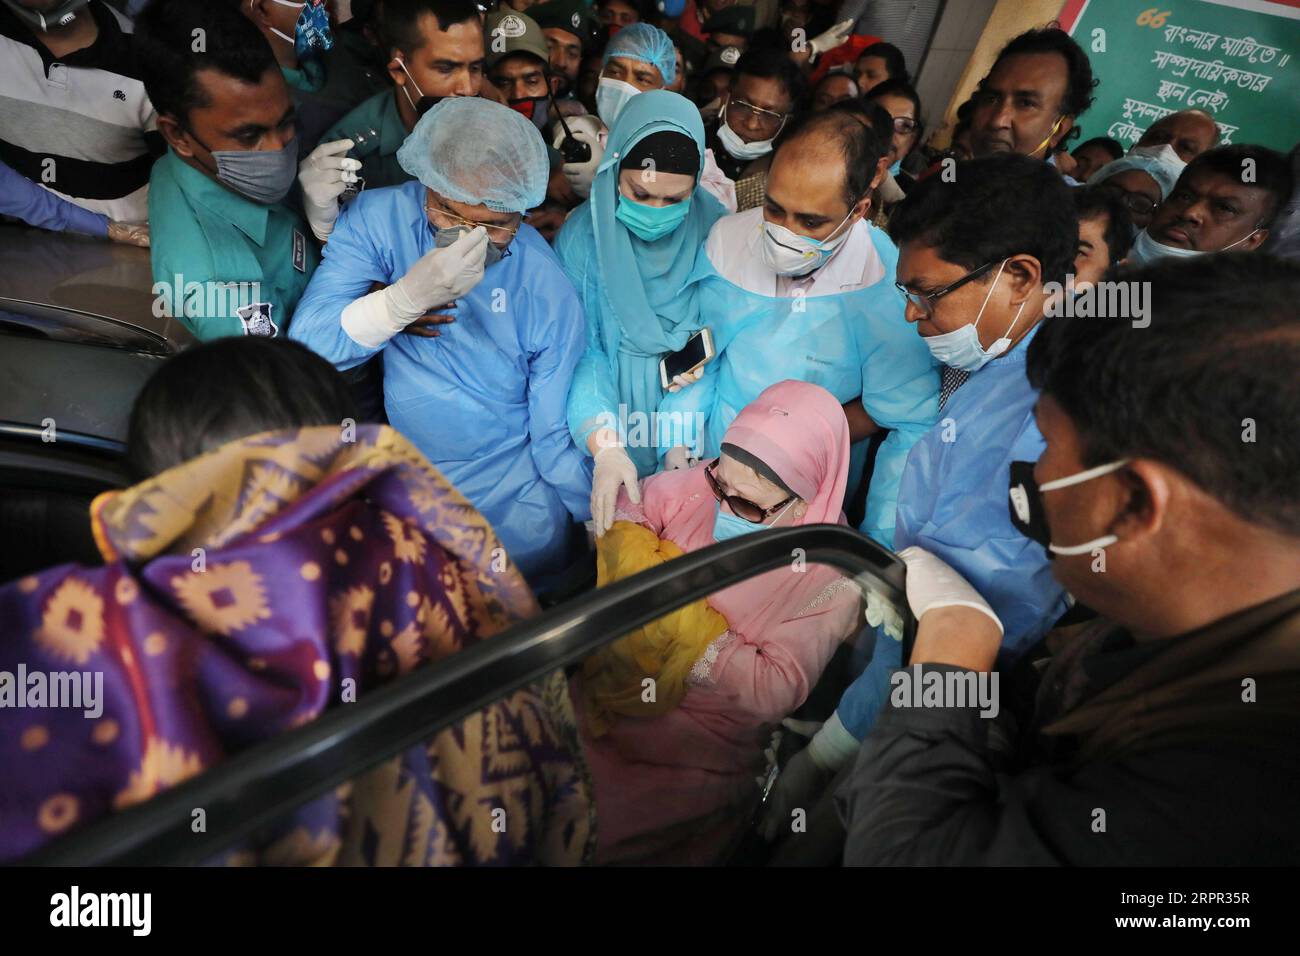 200325 -- DHAKA, March 25, 2020 Xinhua -- Bangladeshi ex-Prime Minister Khaleda Zia in pink clothes leaves the Bangabandhu Sheikh Mujib Medical University BSMMU in Dhaka, Bangladesh, March 25, 2020. Khaleda Zia has been released from jail for six months on humanitarian grounds in light of the COVID-19 outbreak in the country. Zia, also chairperson of Bangladesh Nationalist Party BNP, at around 4:15 p.m. local time on Wednesday, came out of Bangabandhu Sheikh Mujib Medical University BSMMU in capital Dhaka, where she was being treated. In April 2018, Zia was shifted to the BSMMU when she fell i Stock Photo